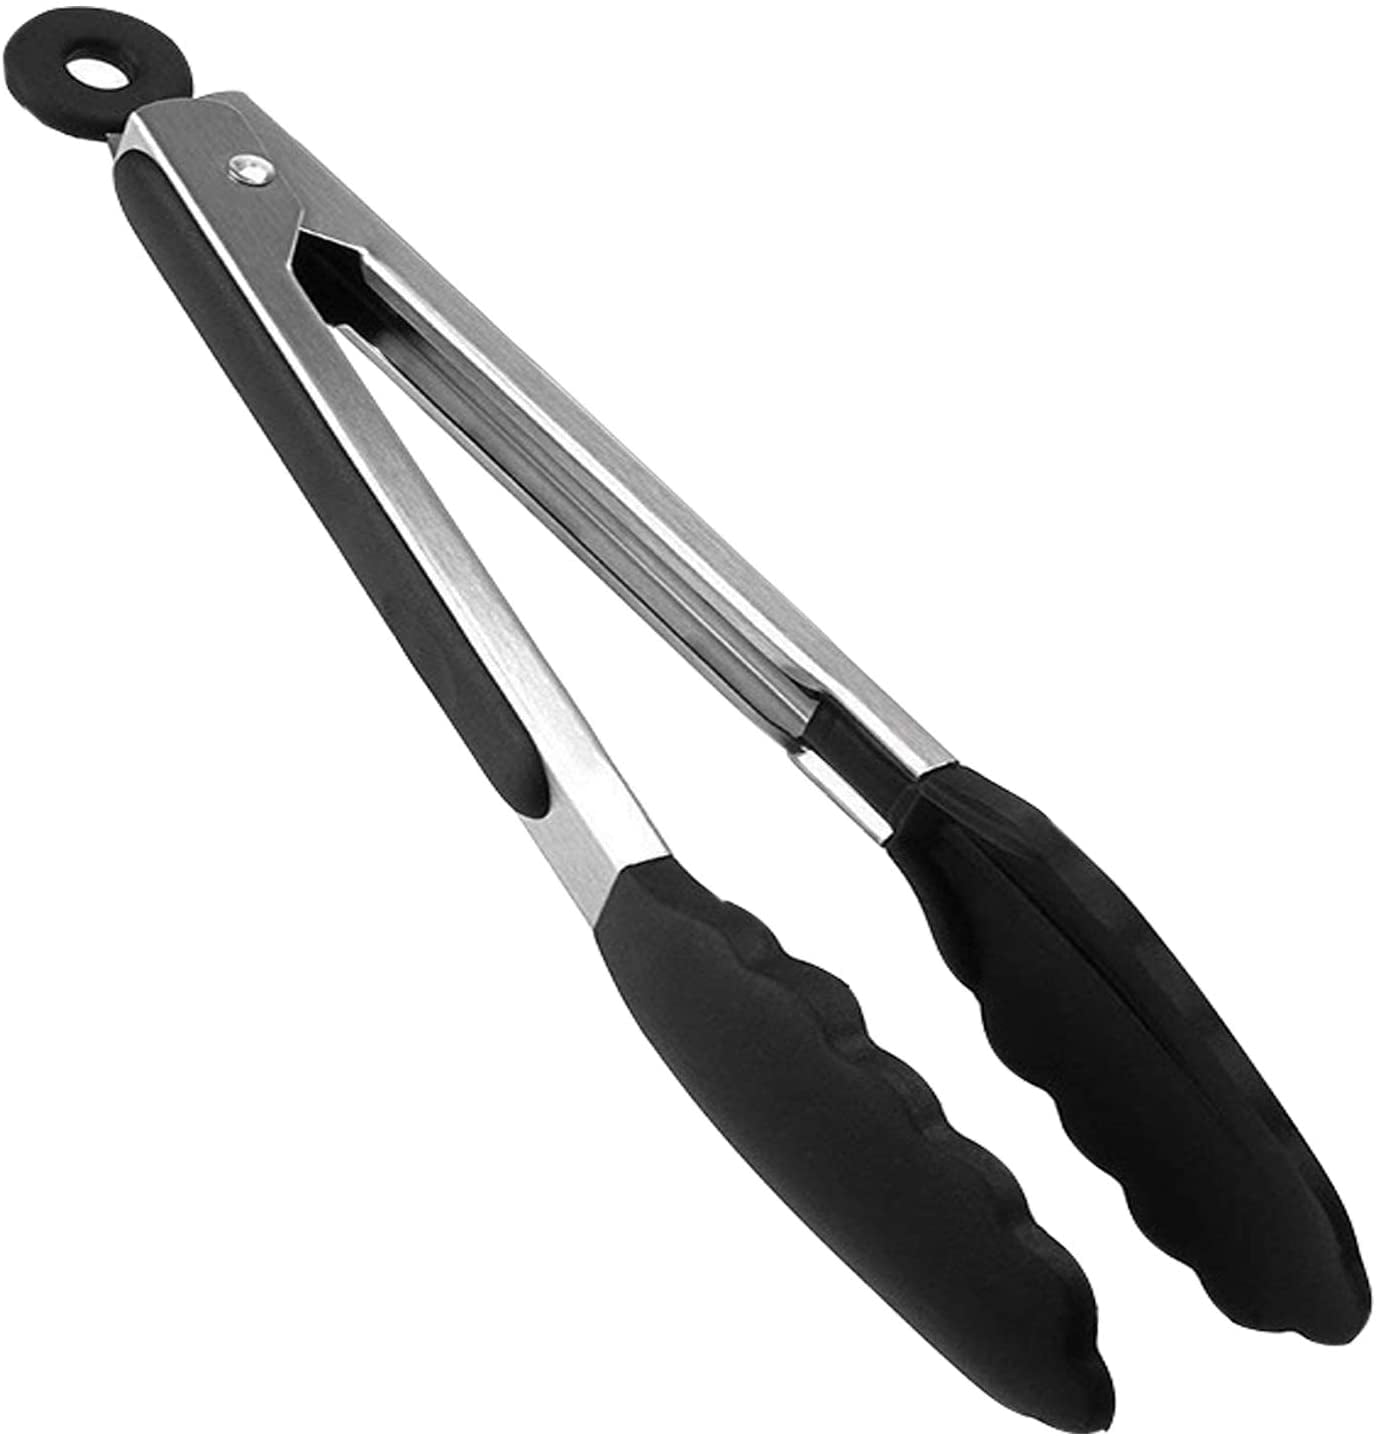 2Pcs Stainless Steel Kitchen Tongs w/Silicone Tip Cooking Noodles Salad  Grilling